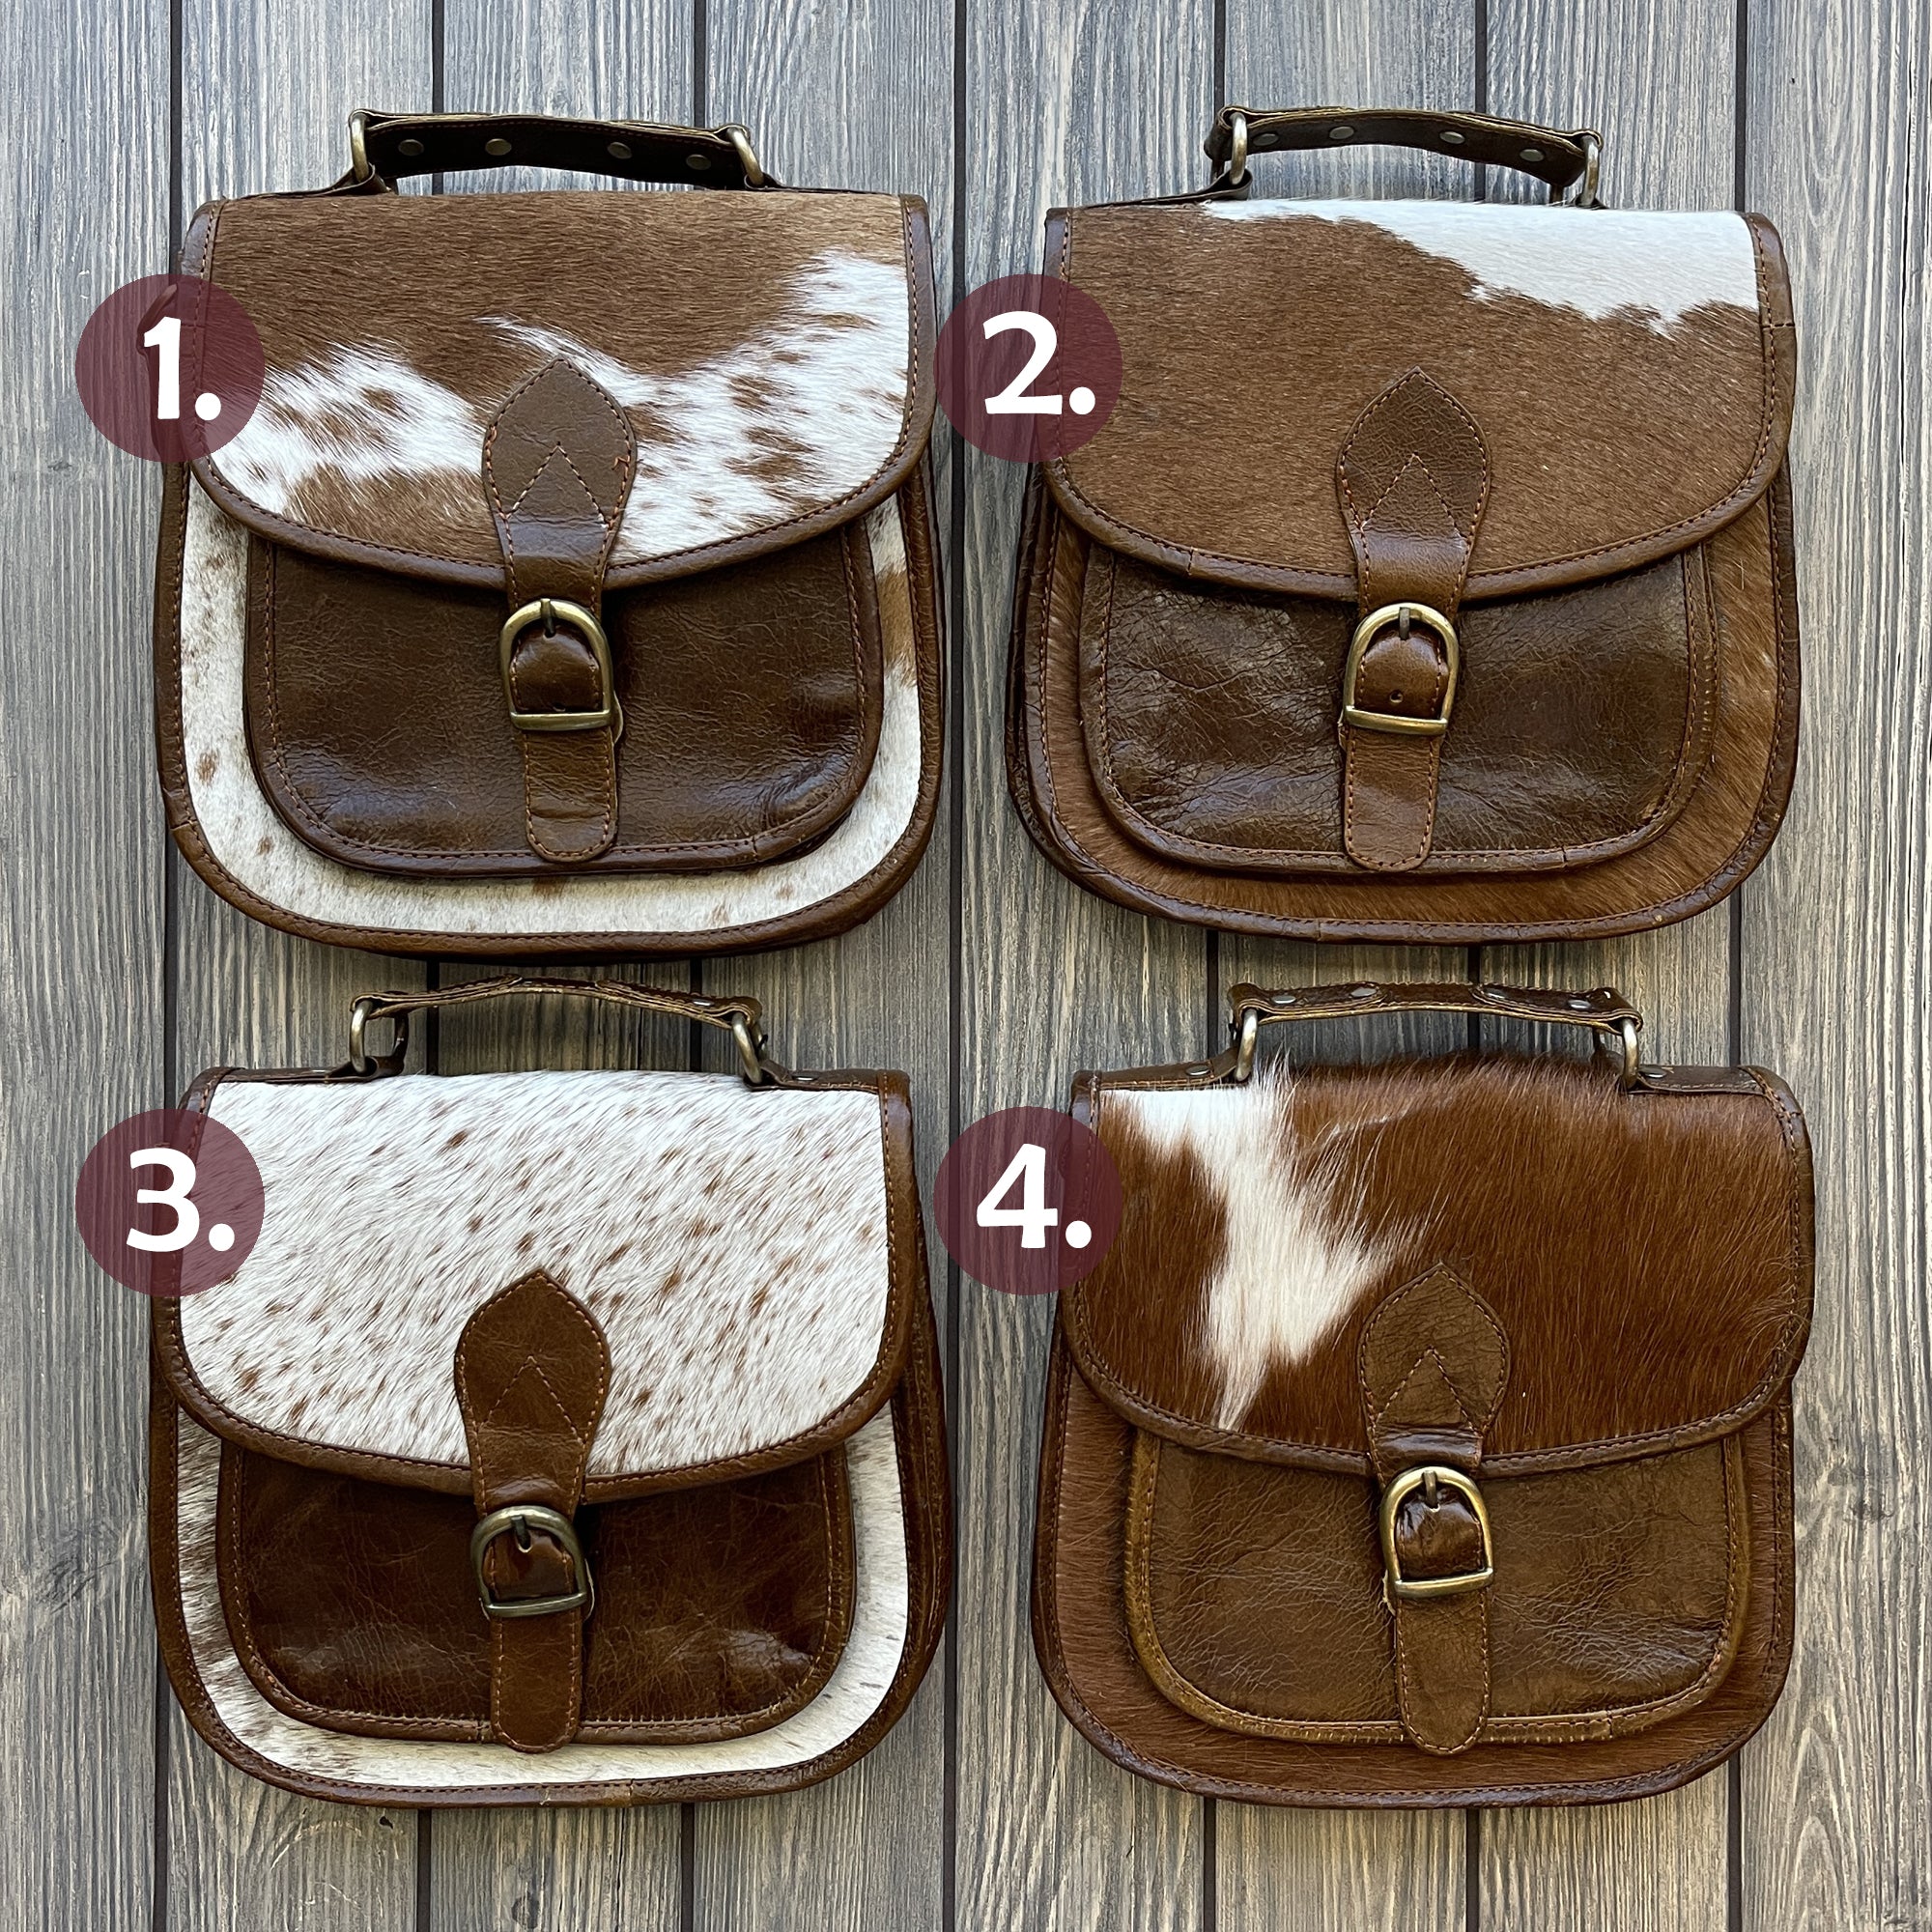 Sioux Tribe Cowhide Crossbody Messenger Purse